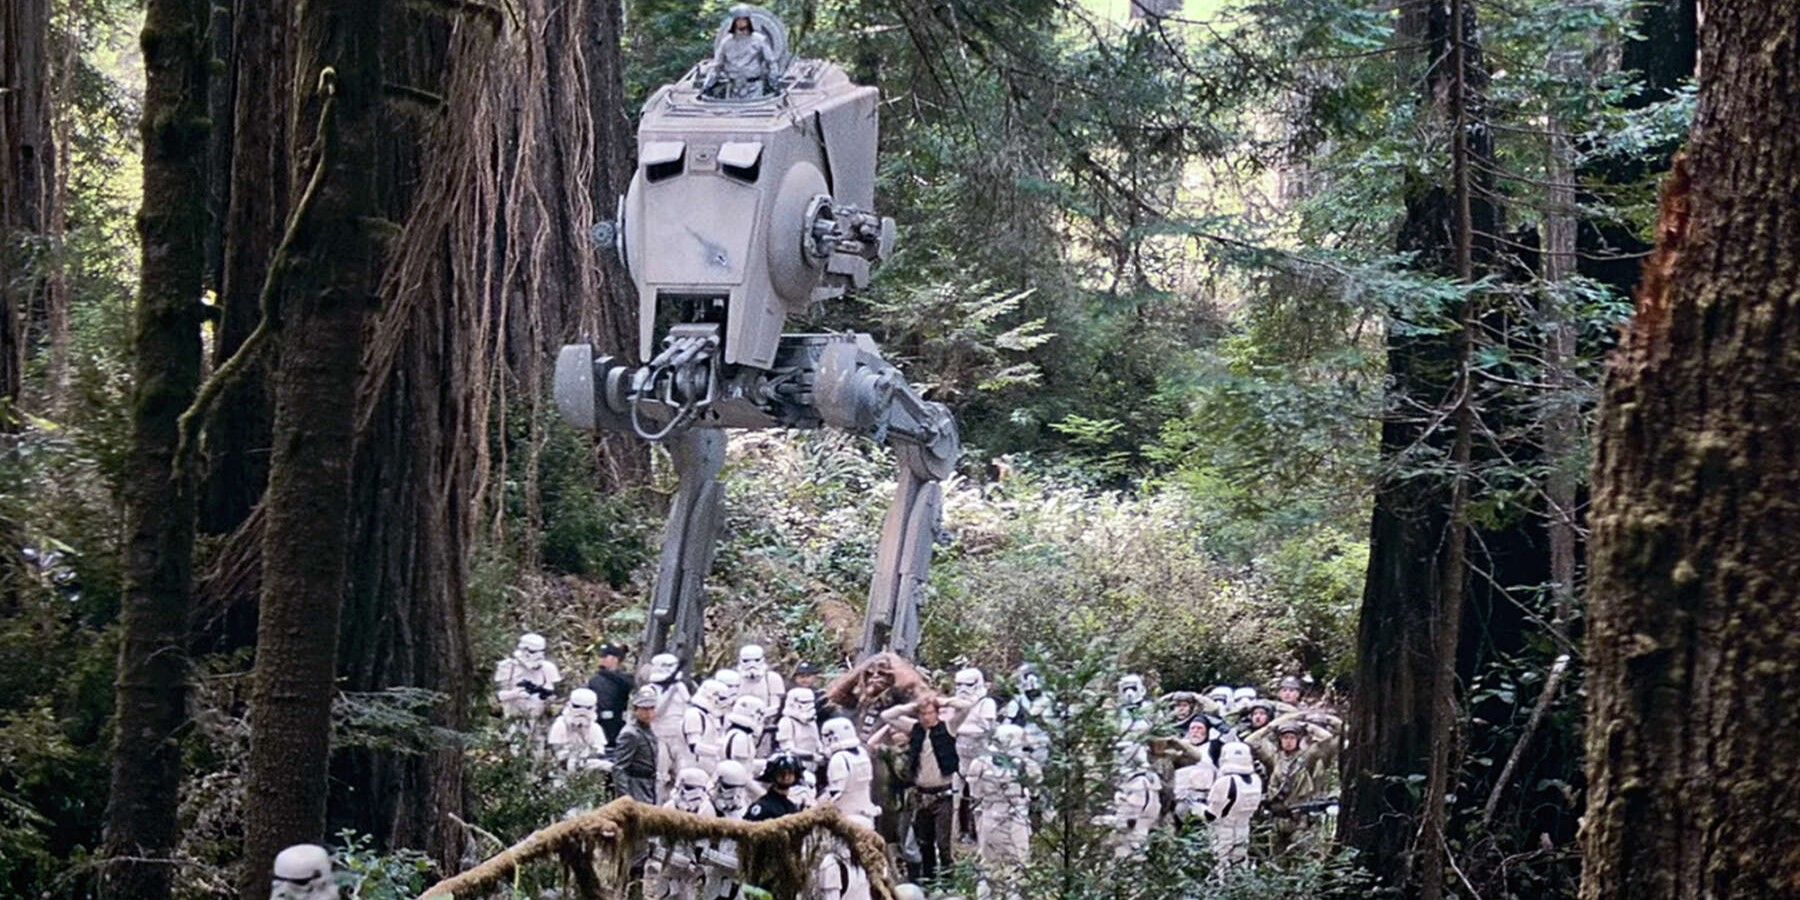 Stormtroopers march Han Solo and Chewbacca through a forest on Endor.